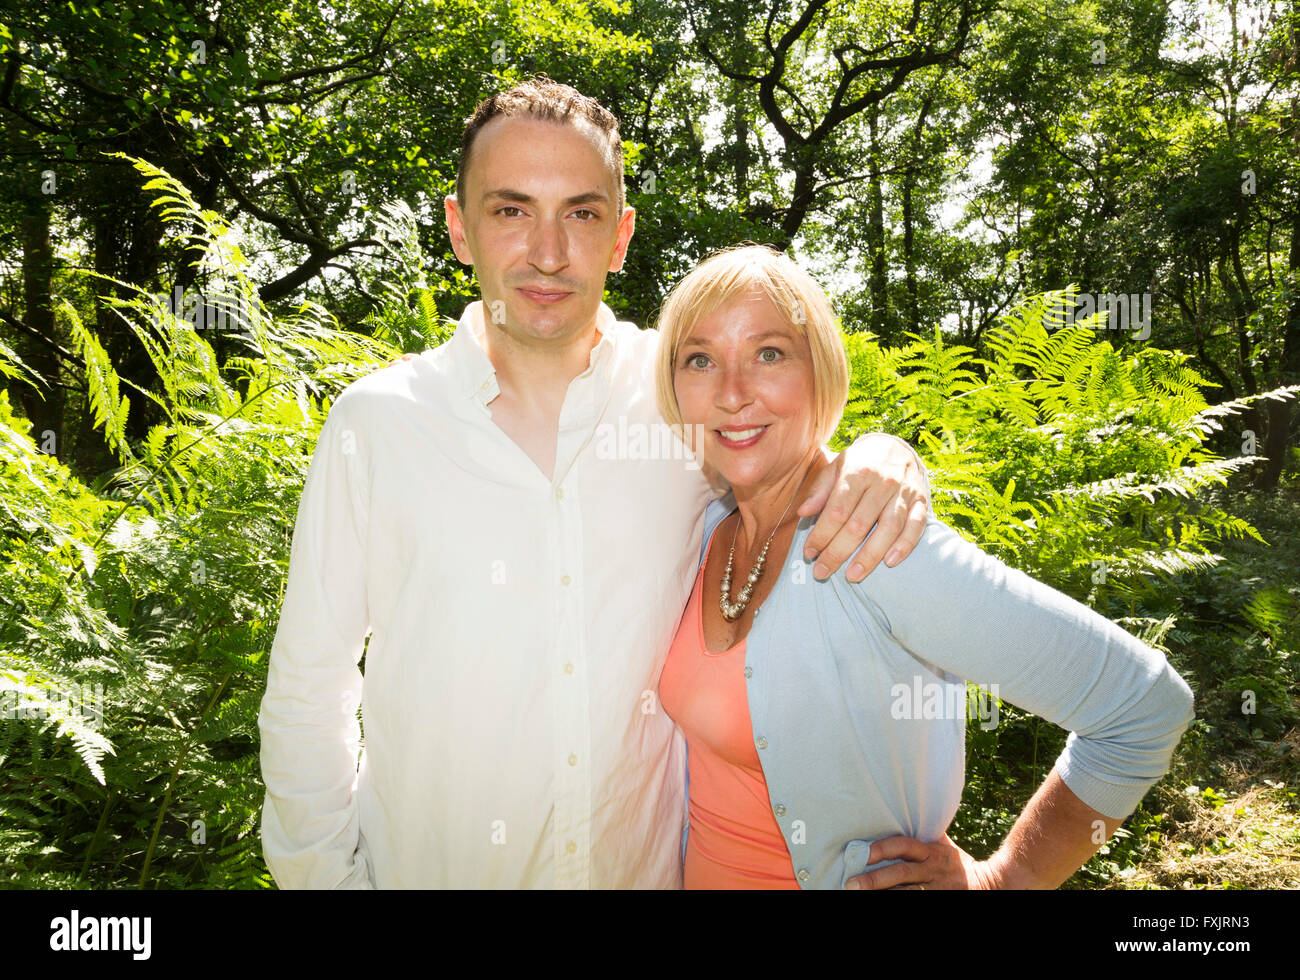 younger man with older woman Stock Photo